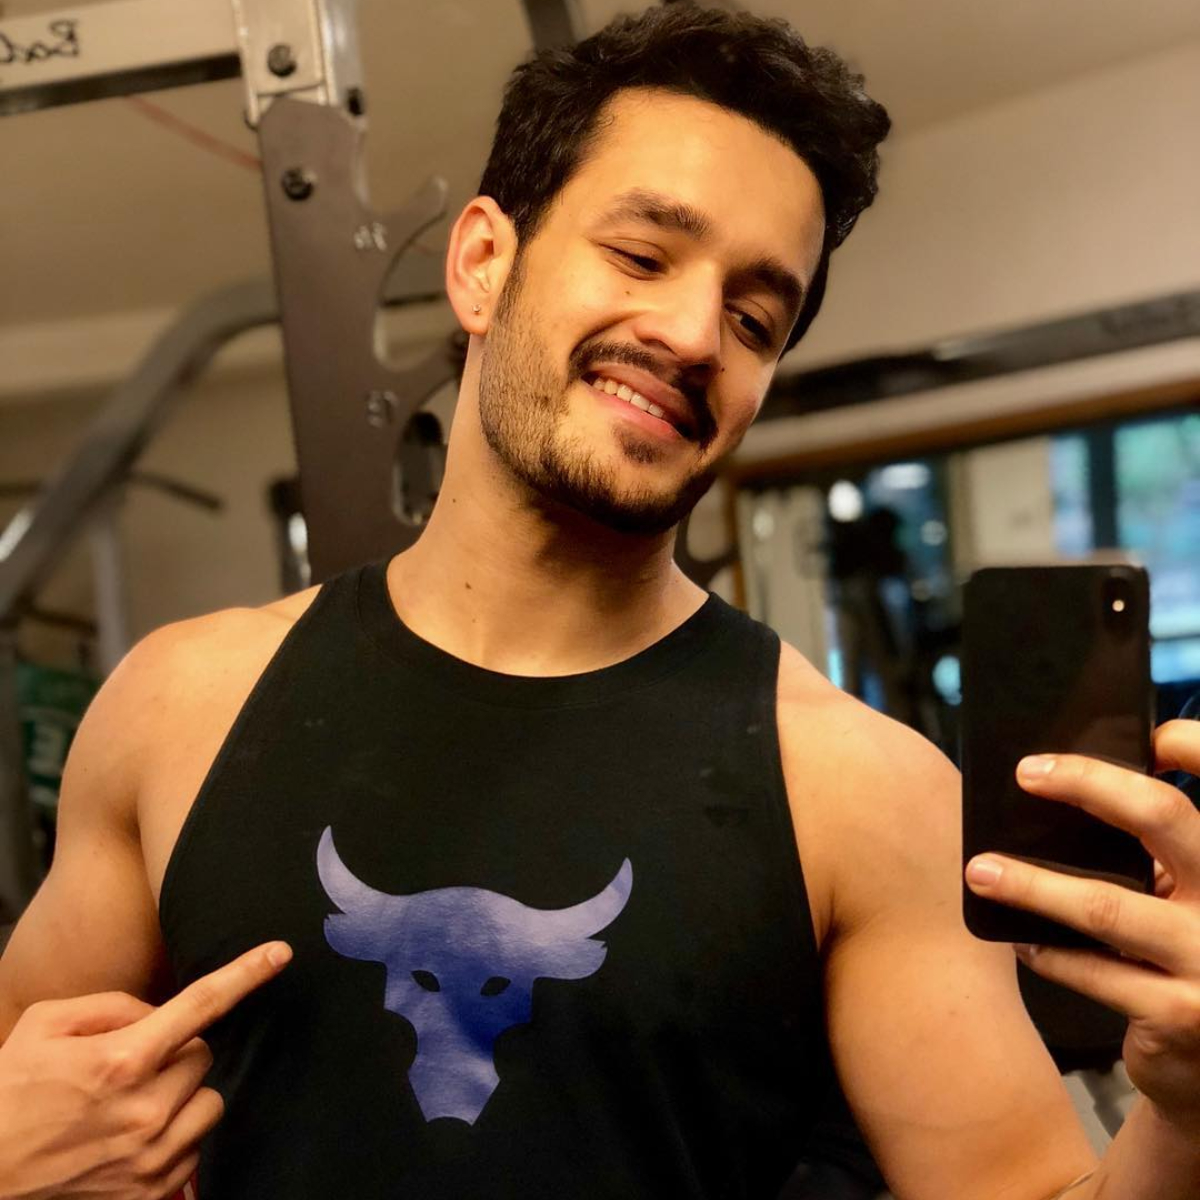 EXCLUSIVE: Akhil Akkineni on Most Eligible Bachelor and why his next few films won’t be love stories